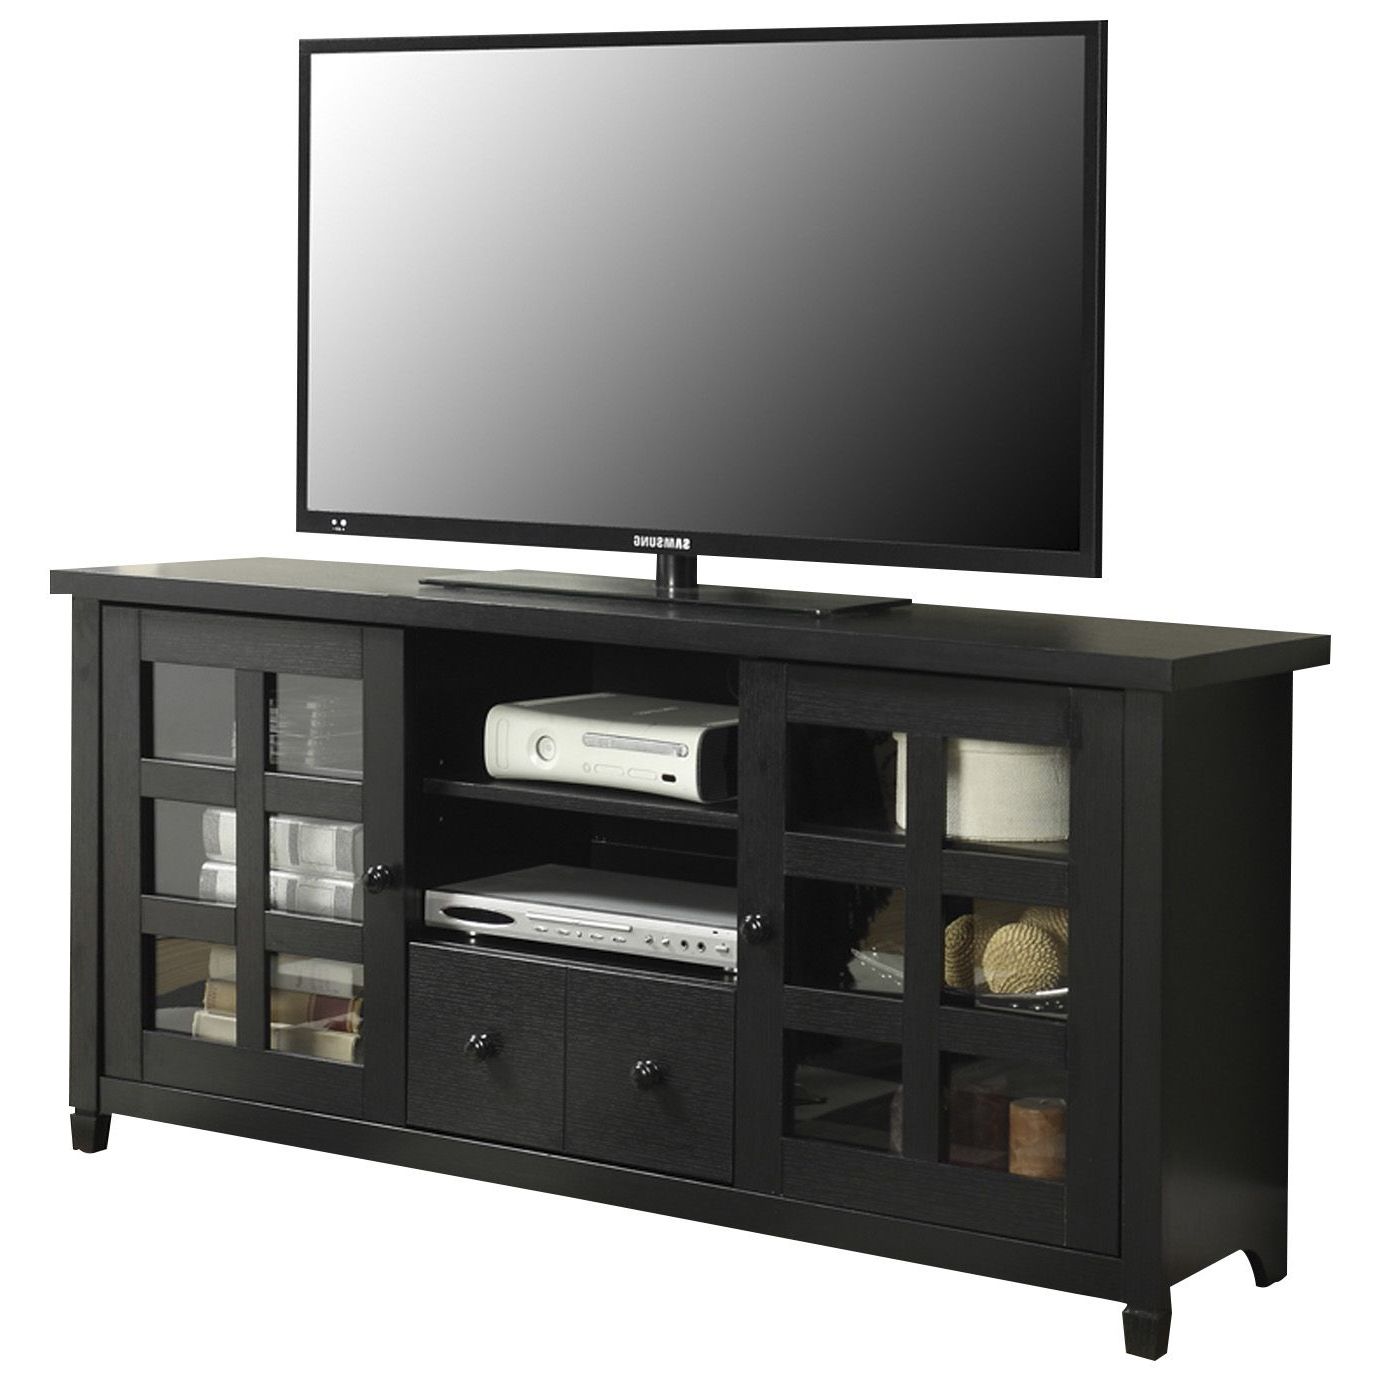 Convenience Concepts Newport Park Lane Tv Stand, Black With Convenience Concepts Newport Marbella 60" Tv Stands (Gallery 2 of 20)